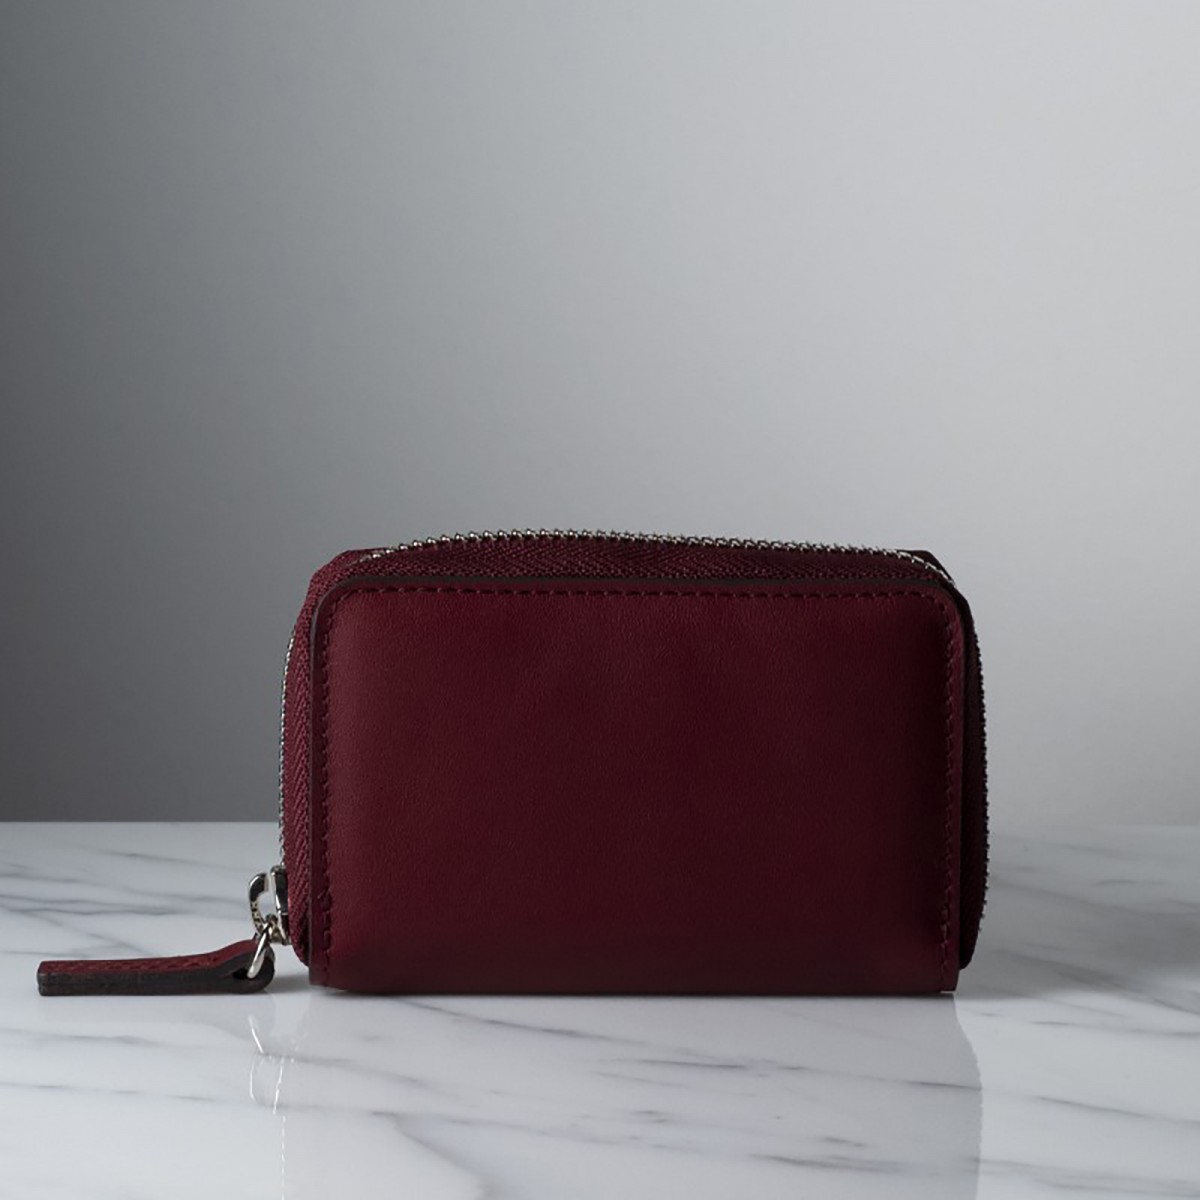 JULIETTA - Calfskin leather credit card and coin holder, handmade in Italy